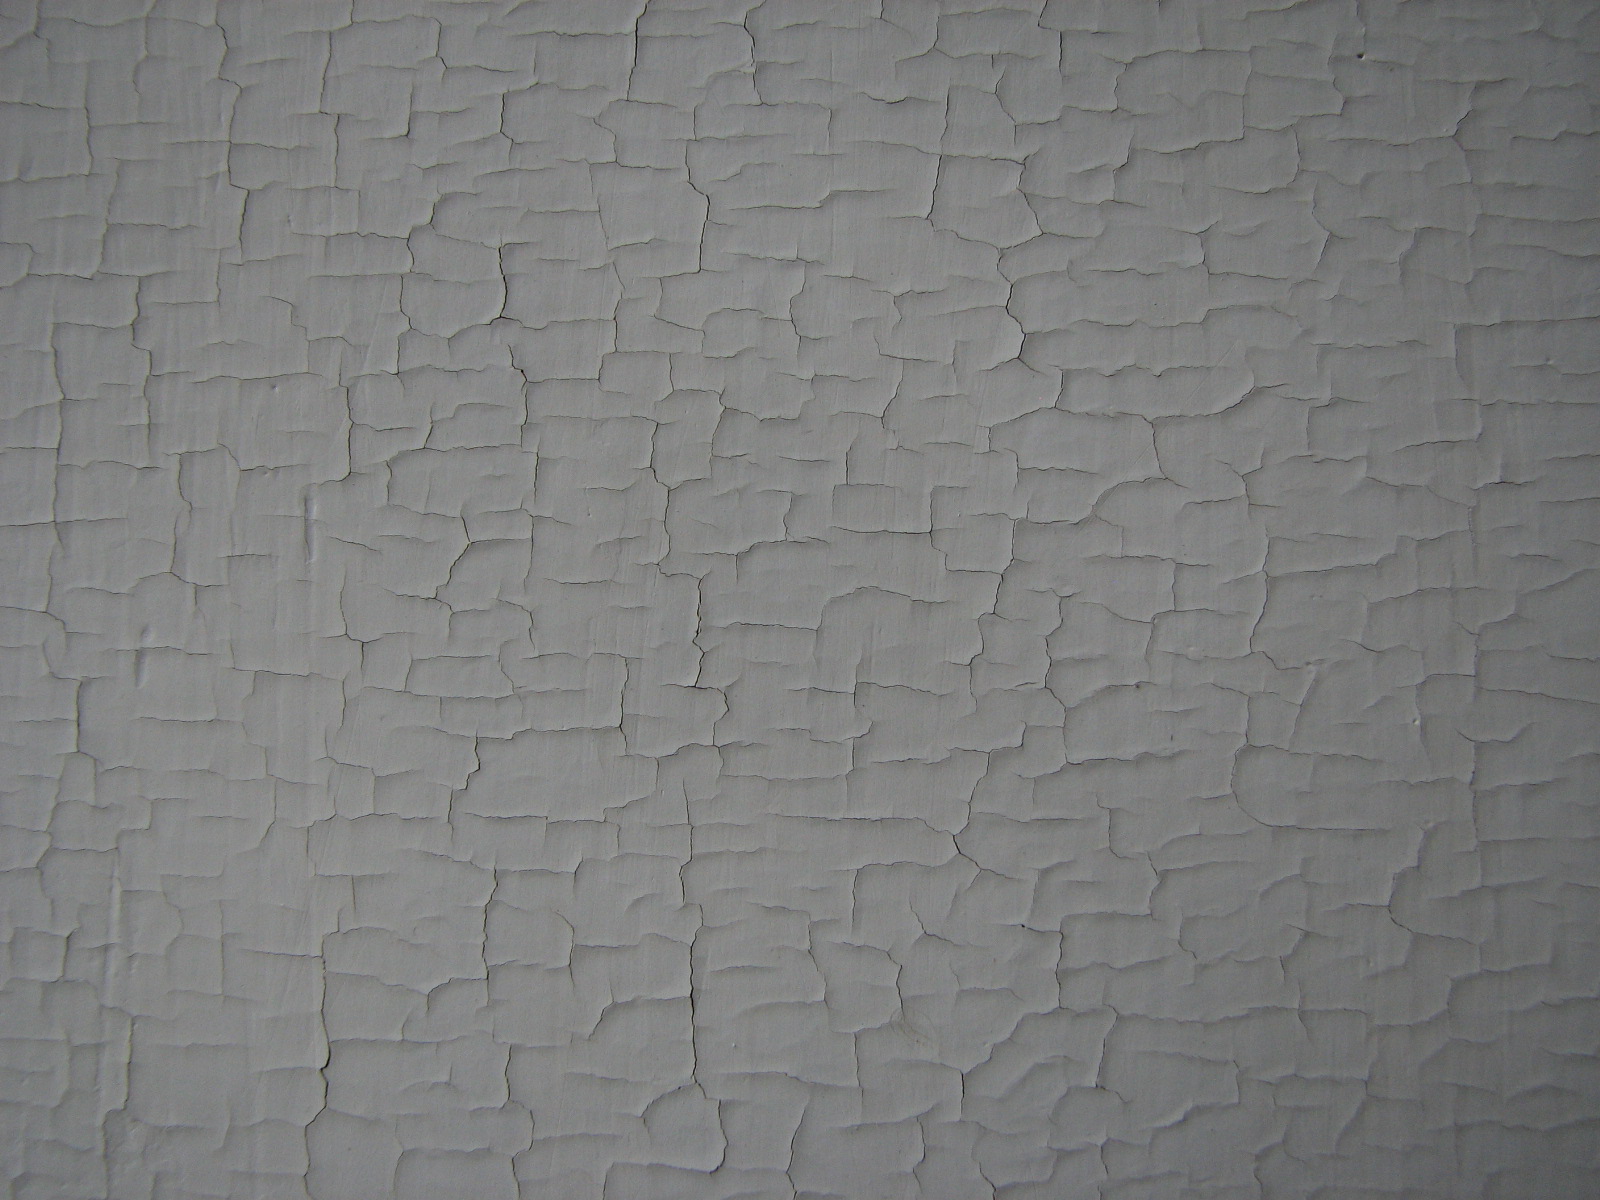 Texture-cracked wall by iFlay on DeviantArt